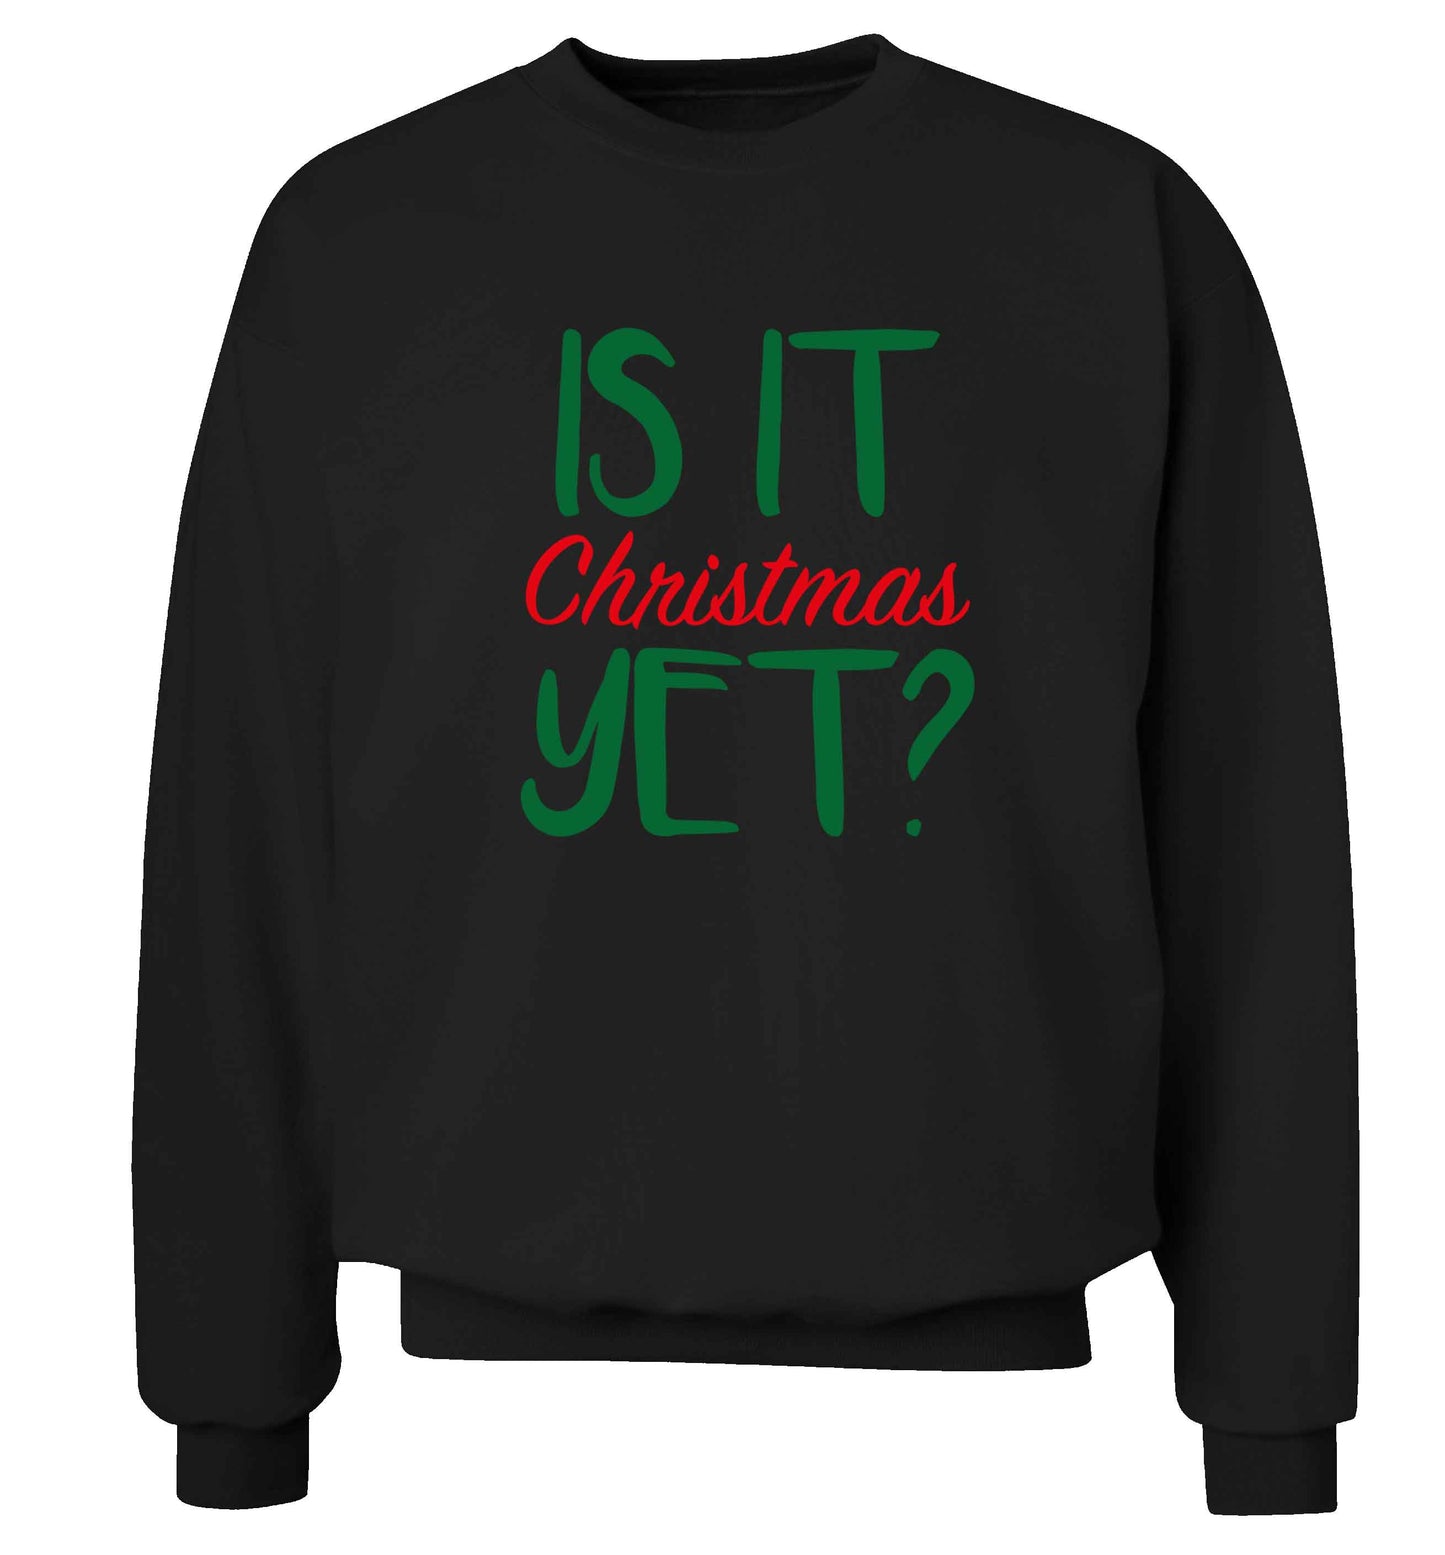 Is it Christmas yet? adult's unisex black sweater 2XL